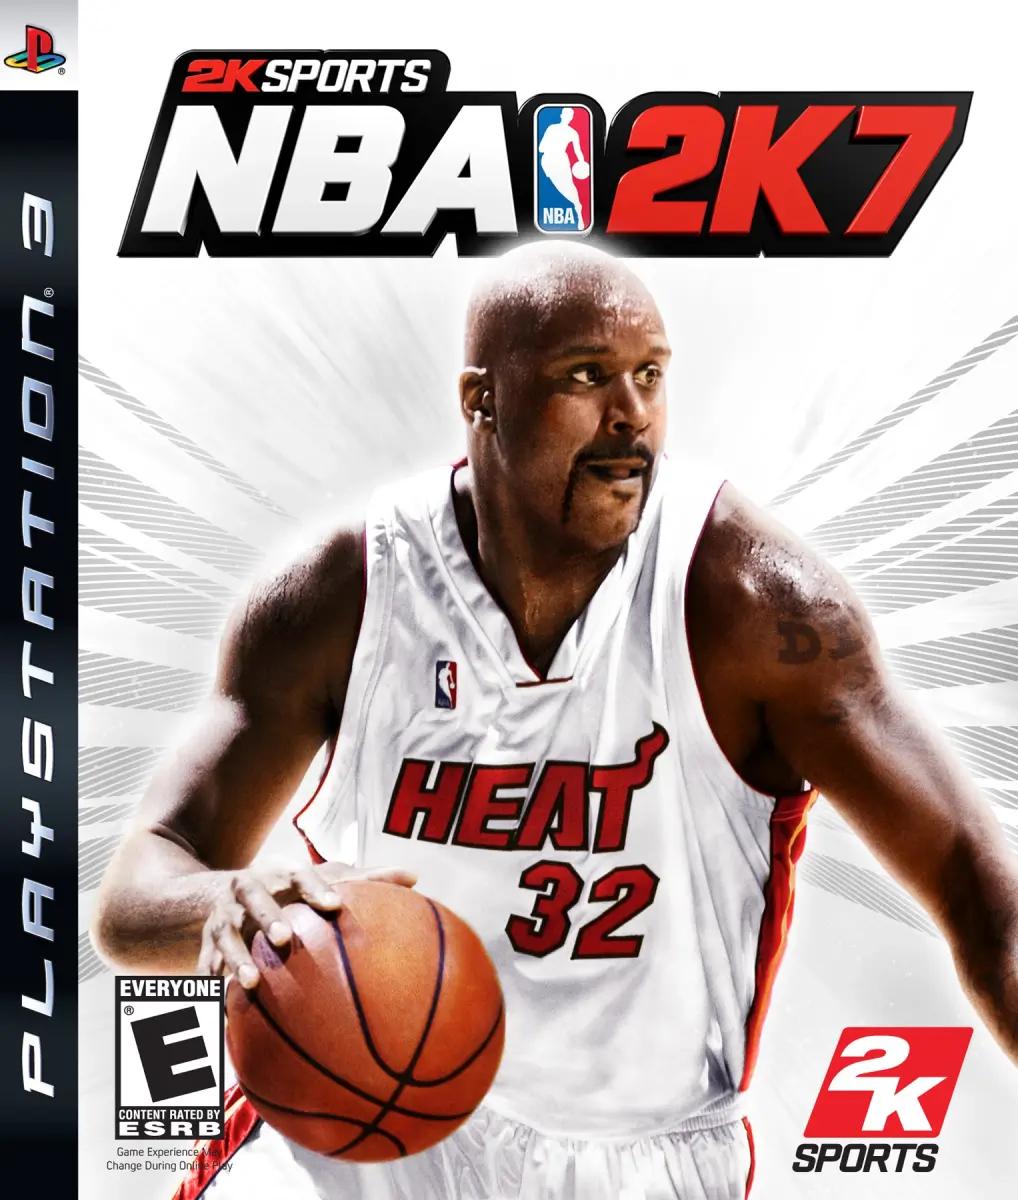 Shaquille O’Neal on the NBA 2K7 cover.